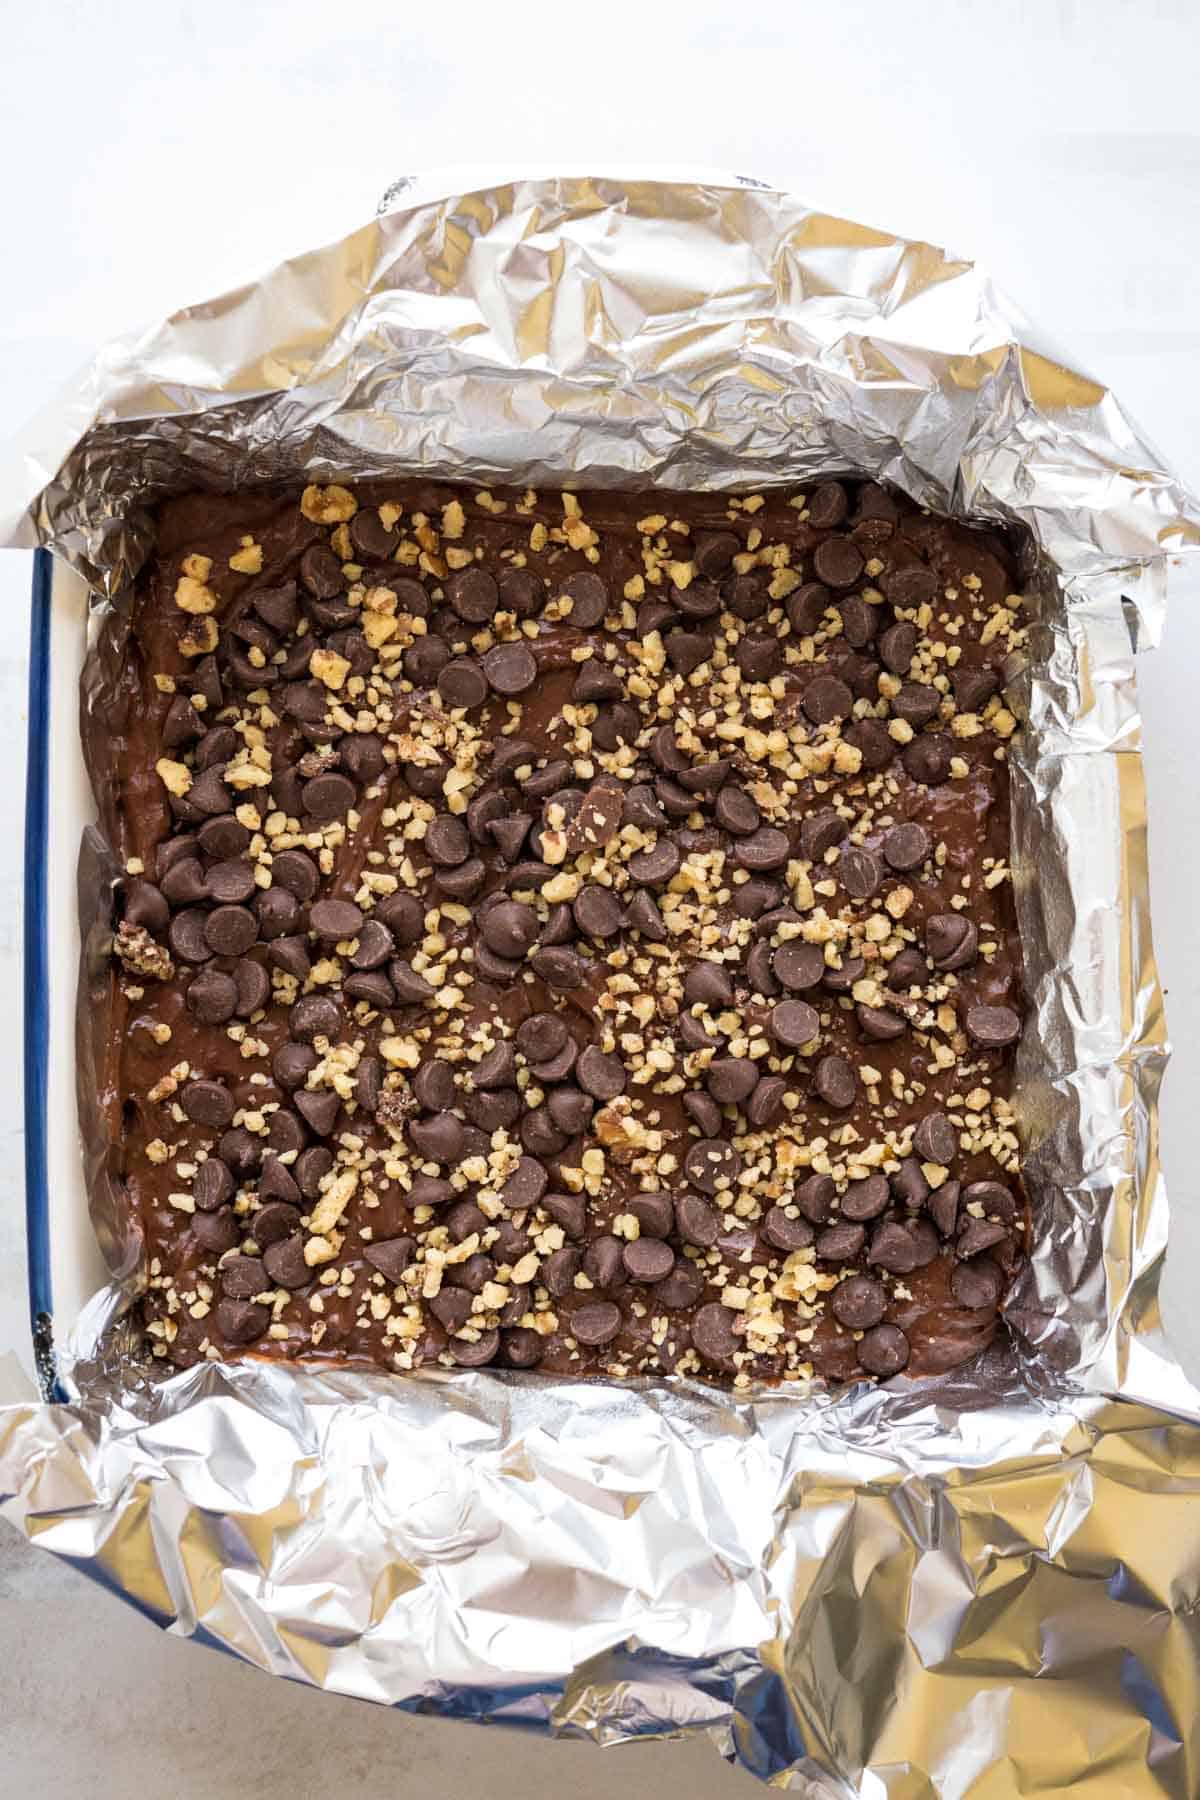 Brownie batter topped with chocolate chips and walnuts in a lined baking dish.